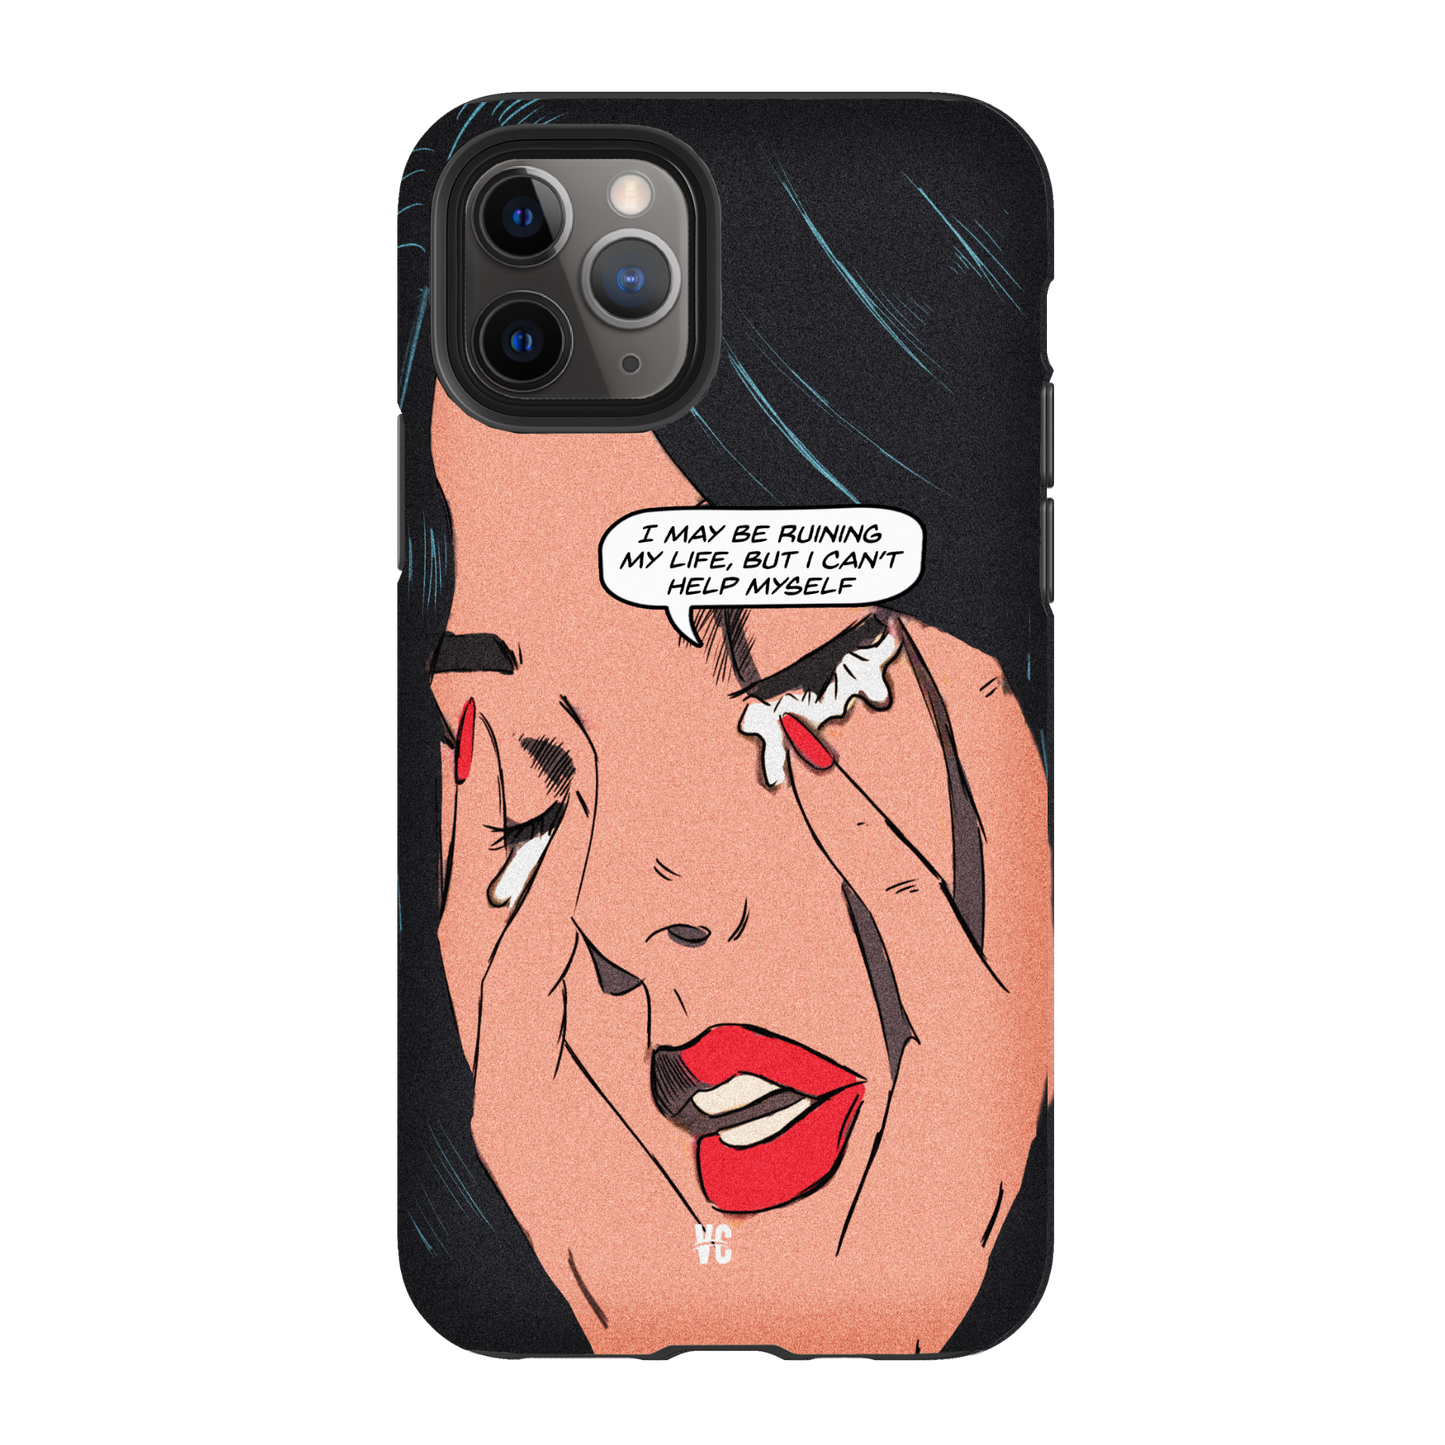 Funny phone case